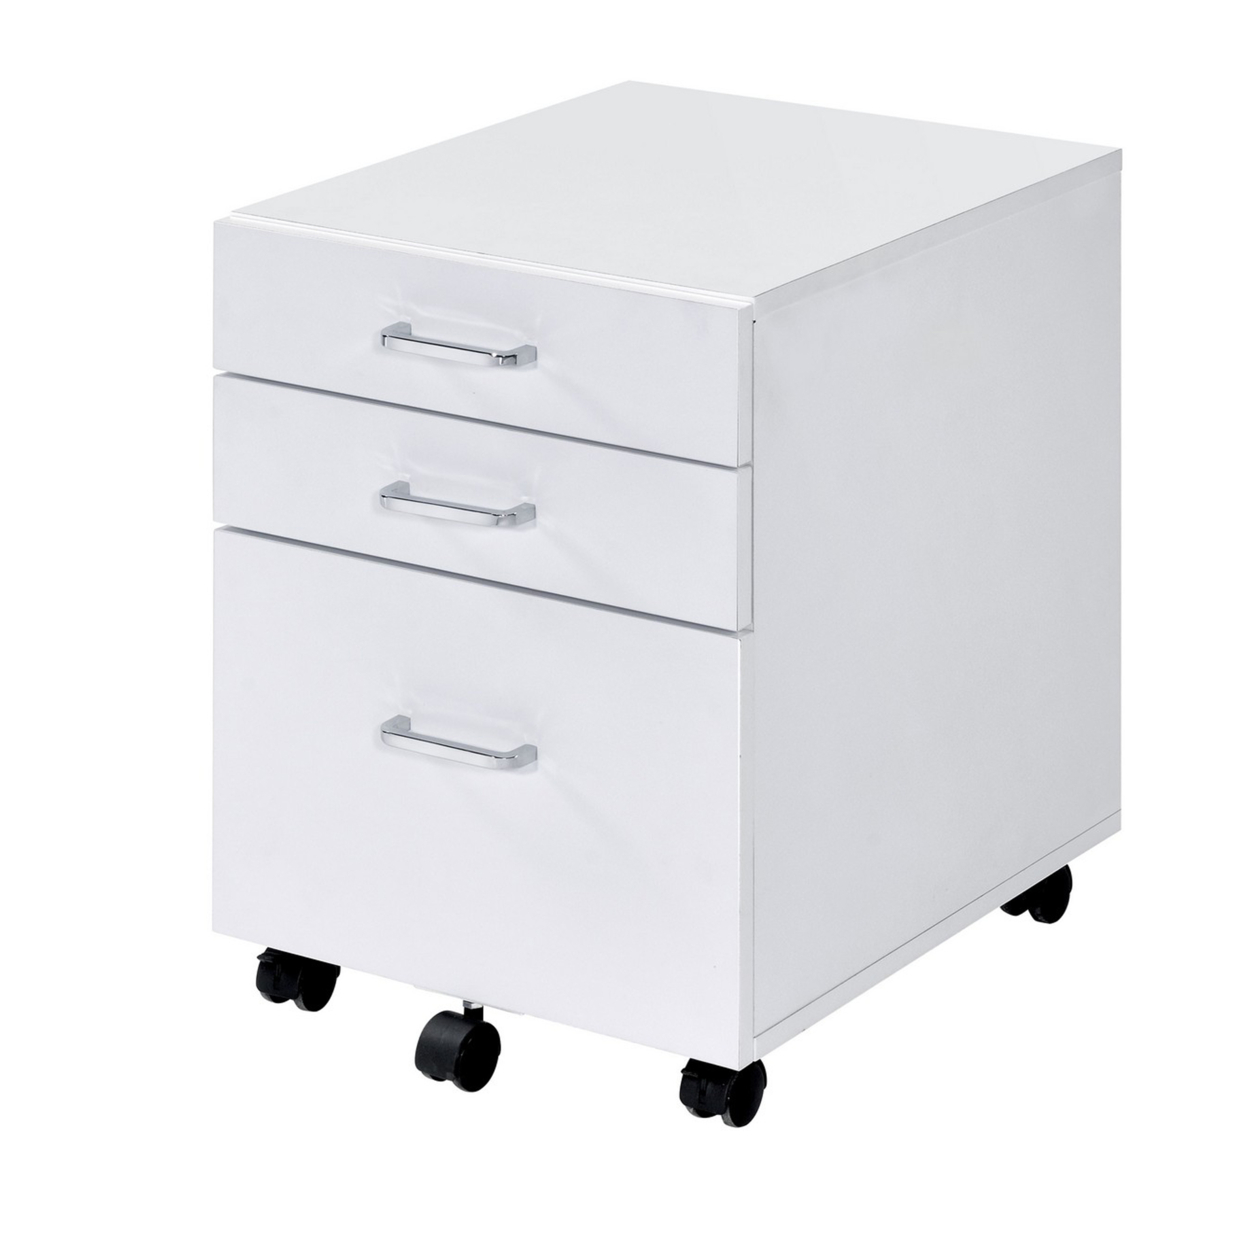 Cabinet With 3 Drawers And Wheels, White- Saltoro Sherpi